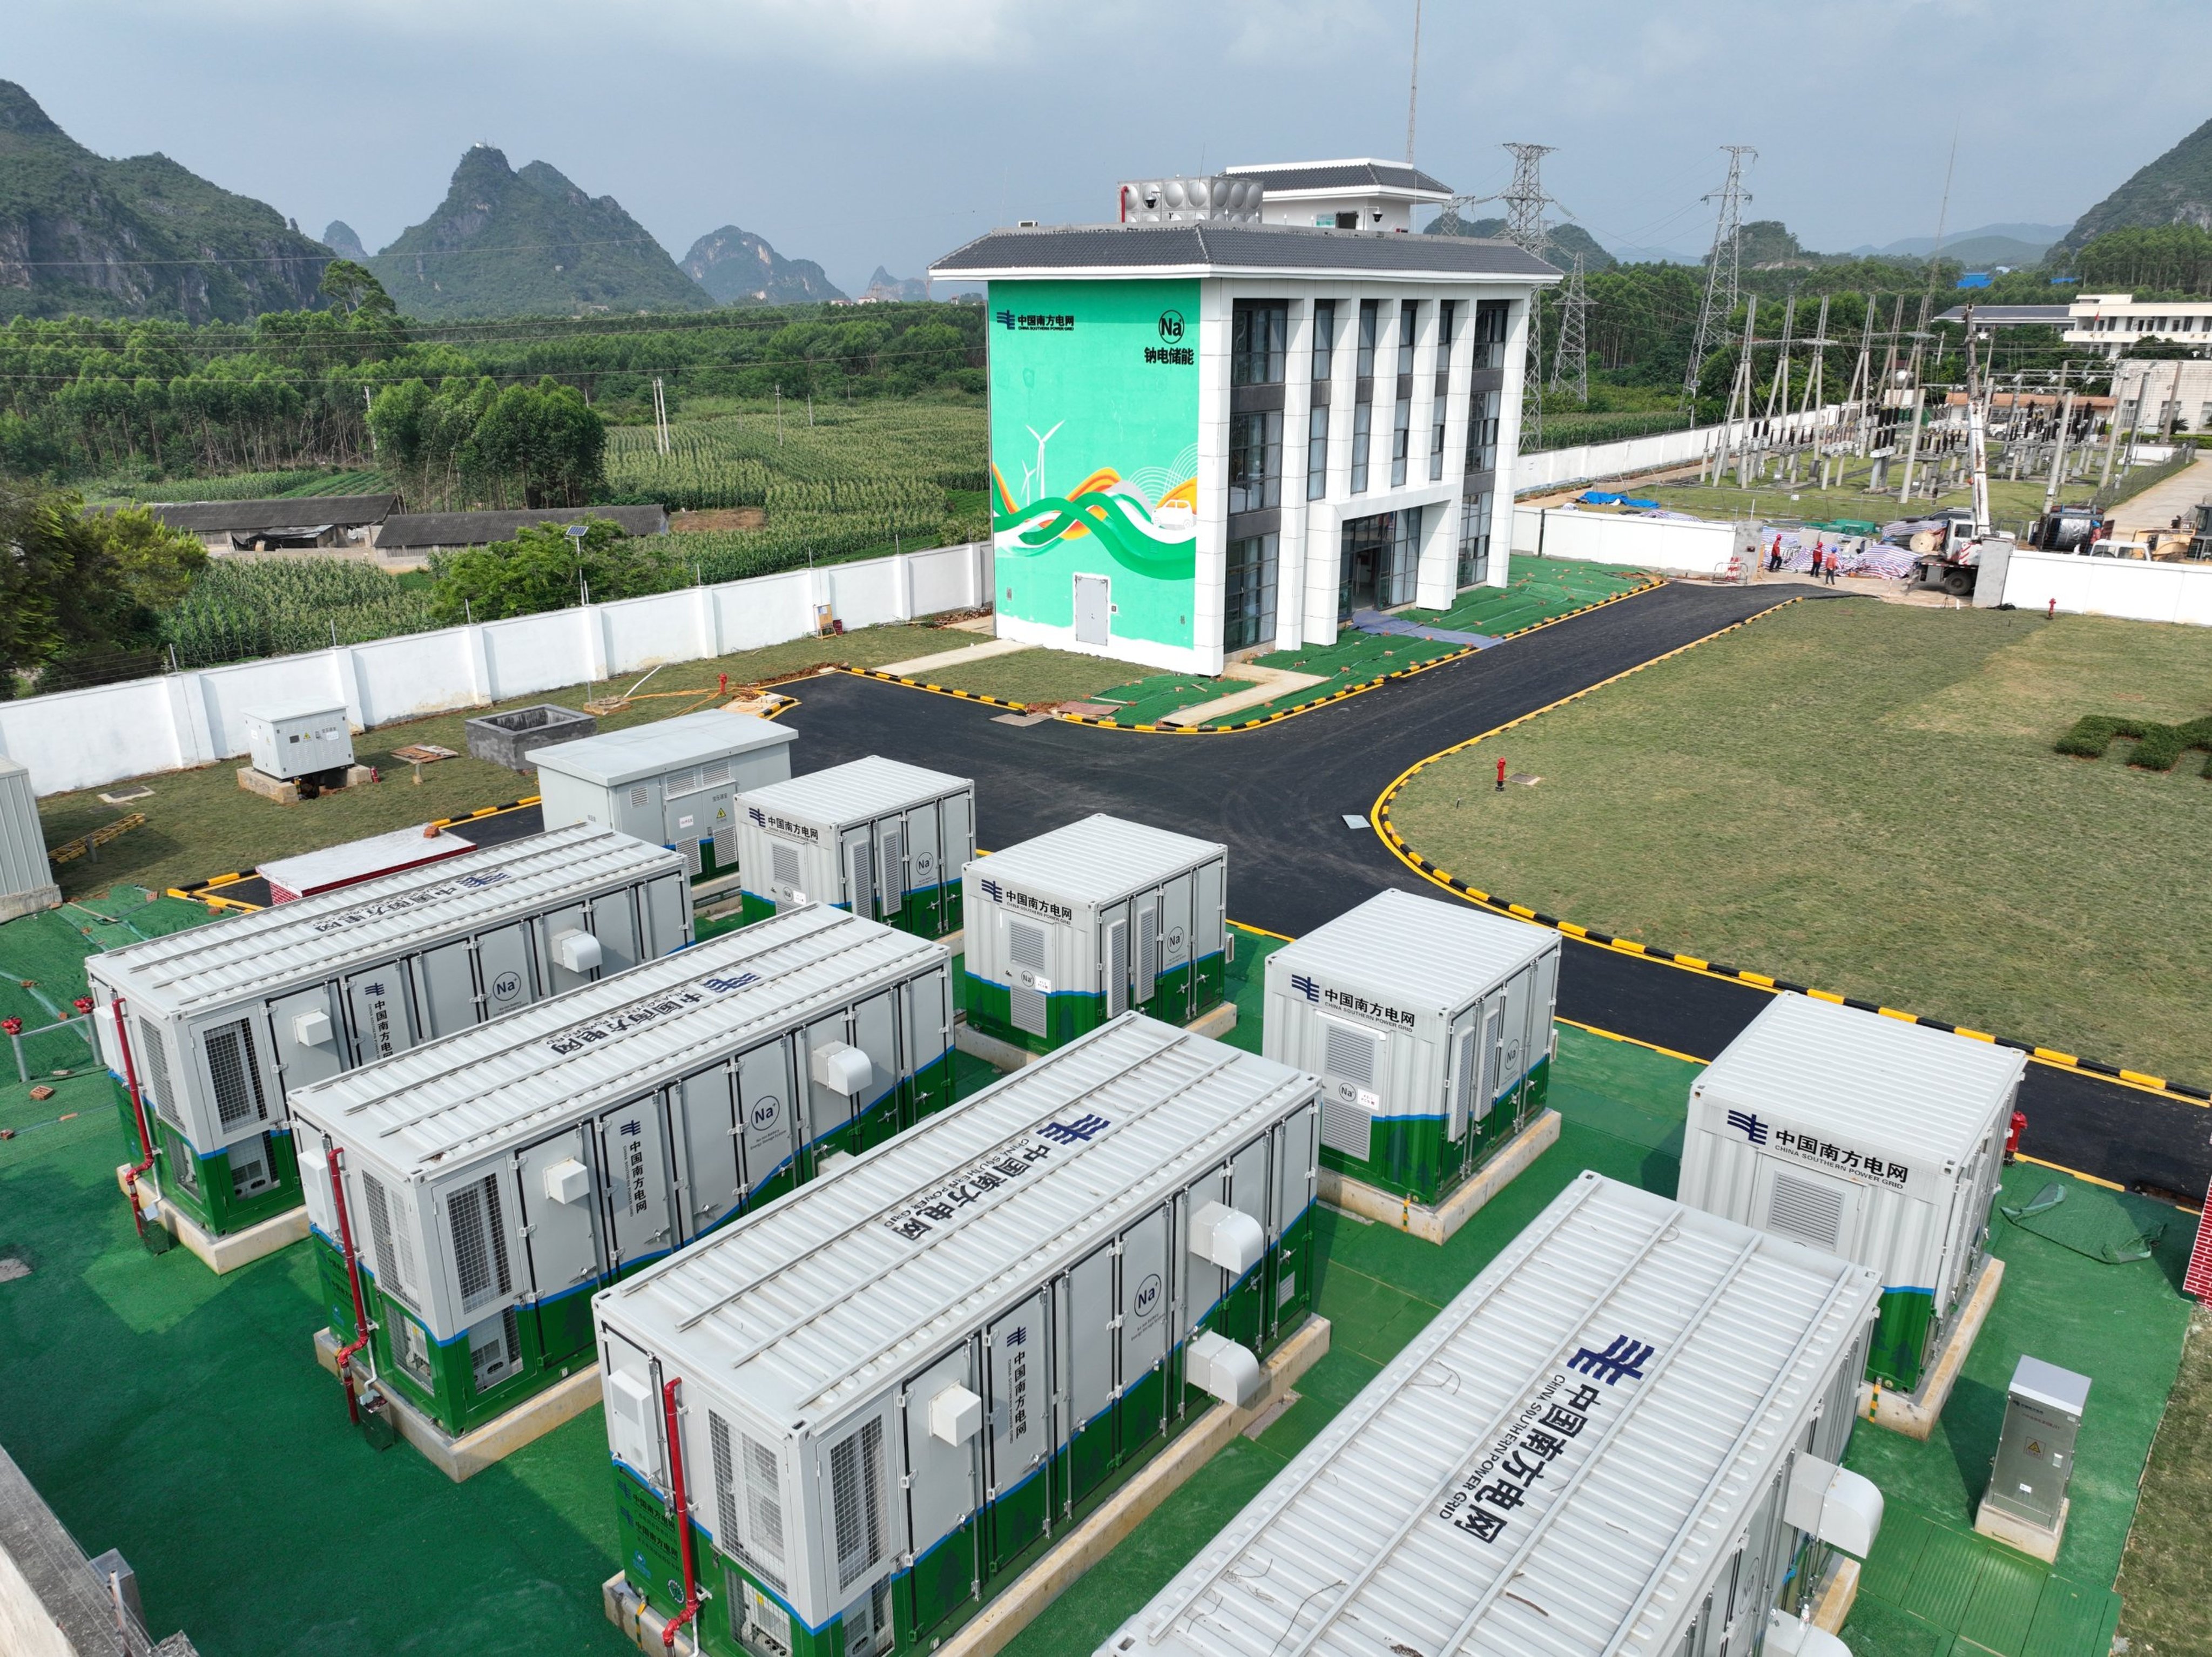 China’s first large-scale sodium-ion battery energy storage station has officially commenced operations in Nanning, Guangxi autonomous region. Photo: Handout